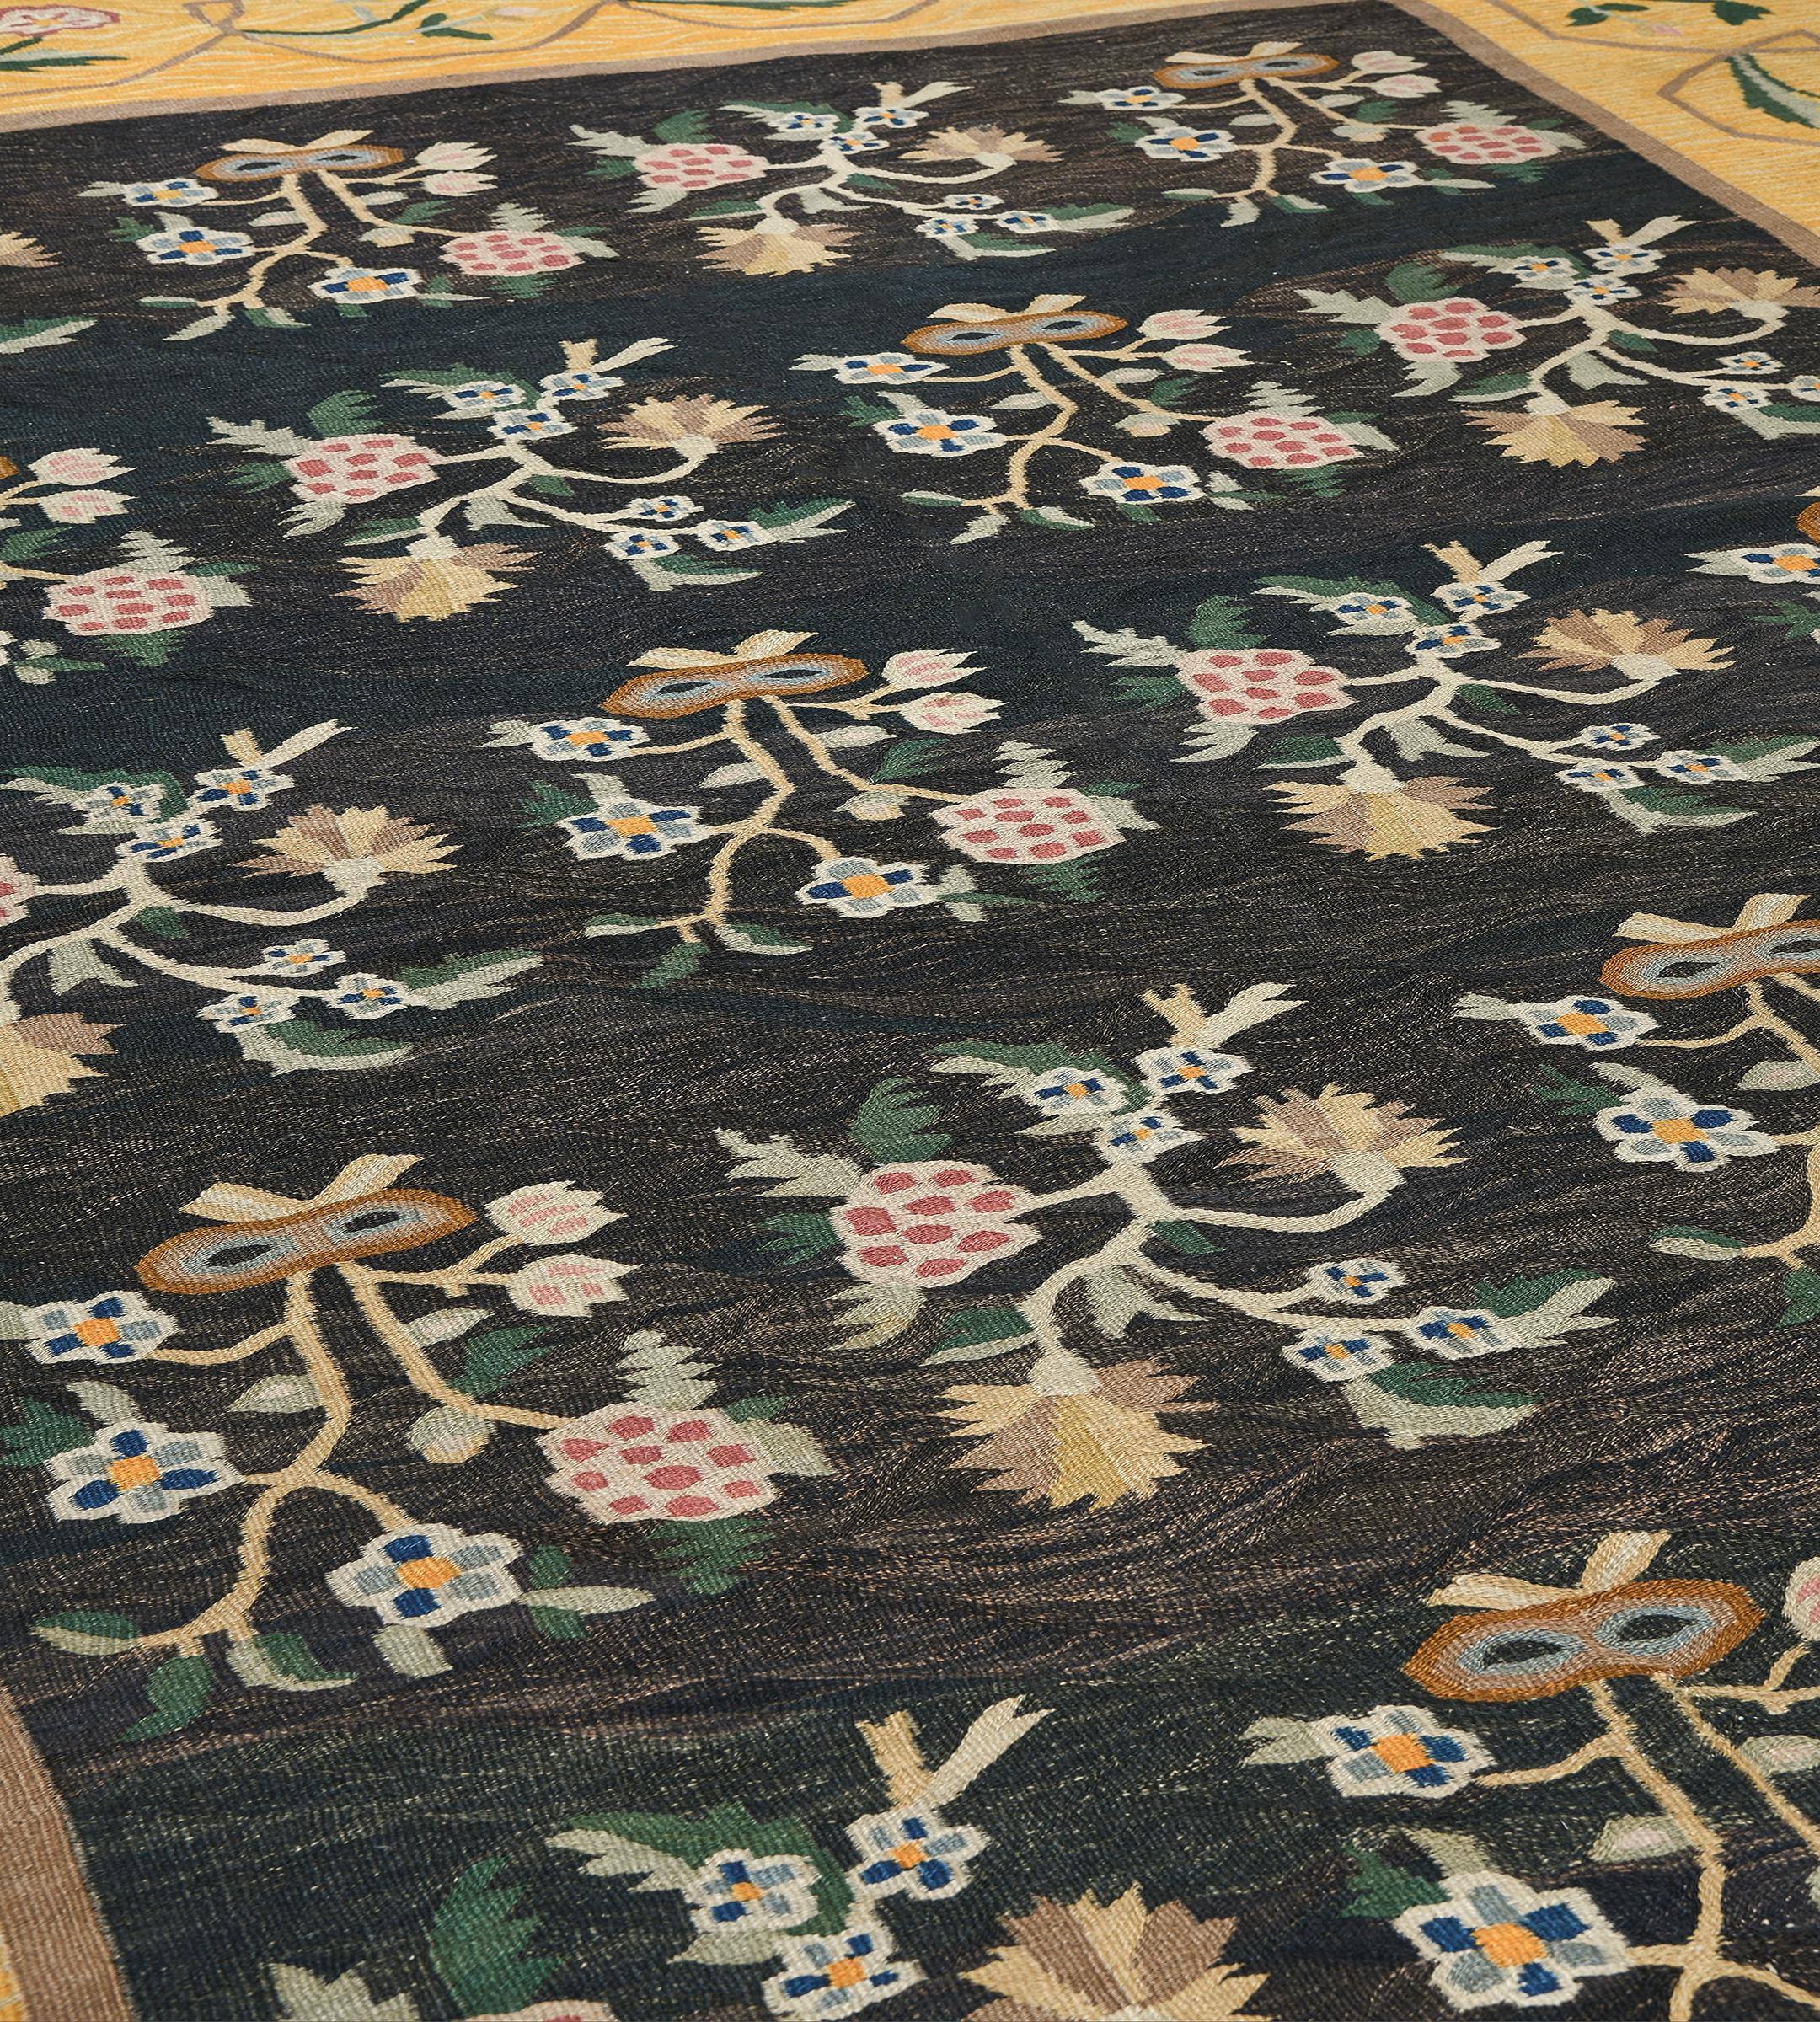 This traditional handwoven Romanian Bessarabian rug has a charcoal-black field with diagonal rows of polychrome floral sprays, in a whimsical golden-yellow border of angular meandering flowering vines.